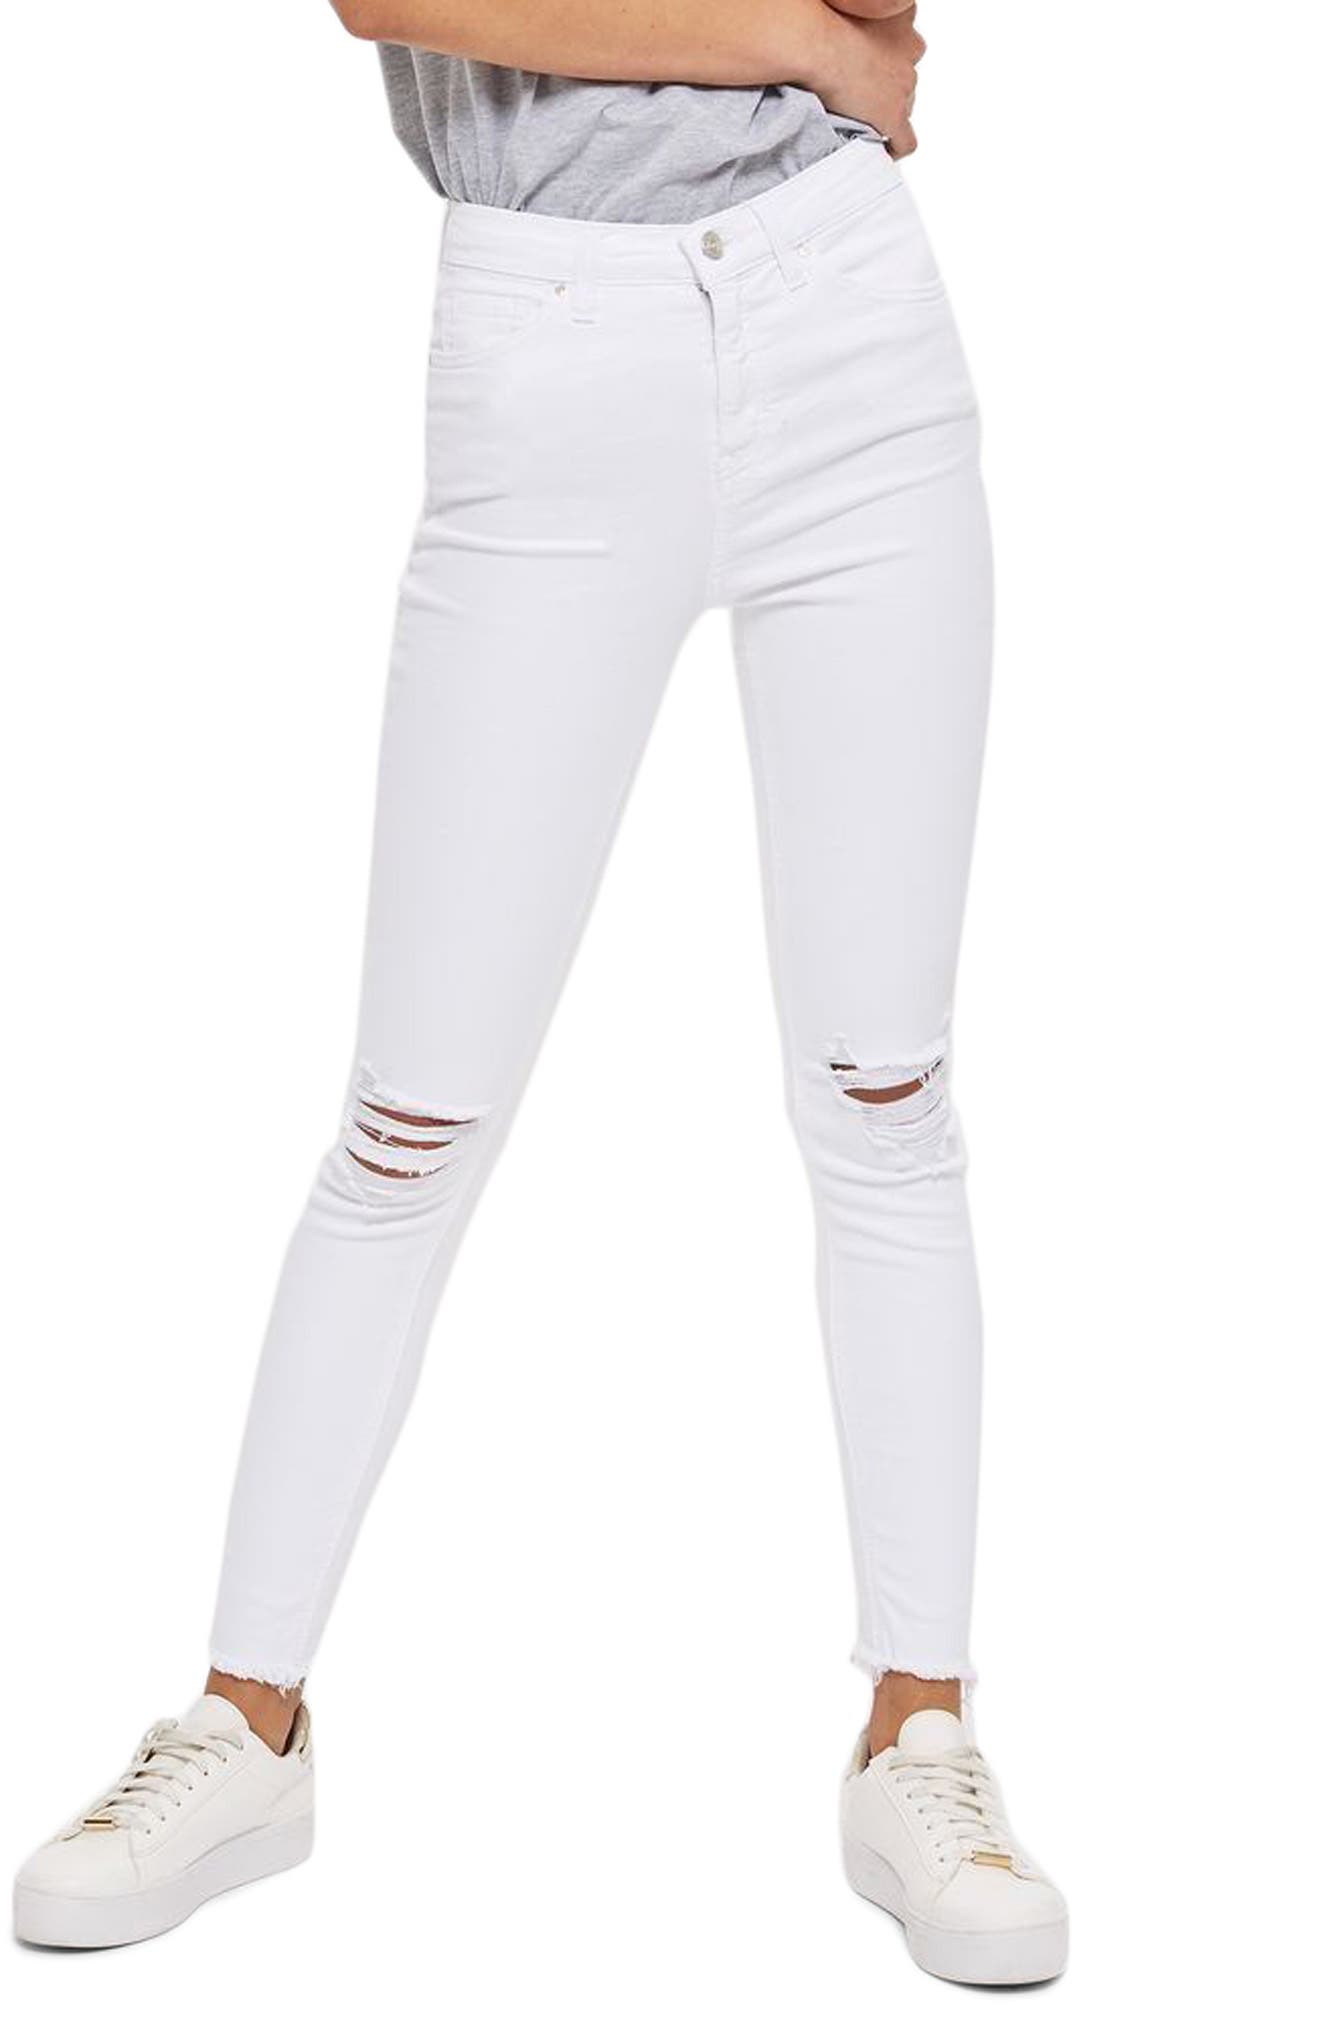 topshop white high waisted jeans